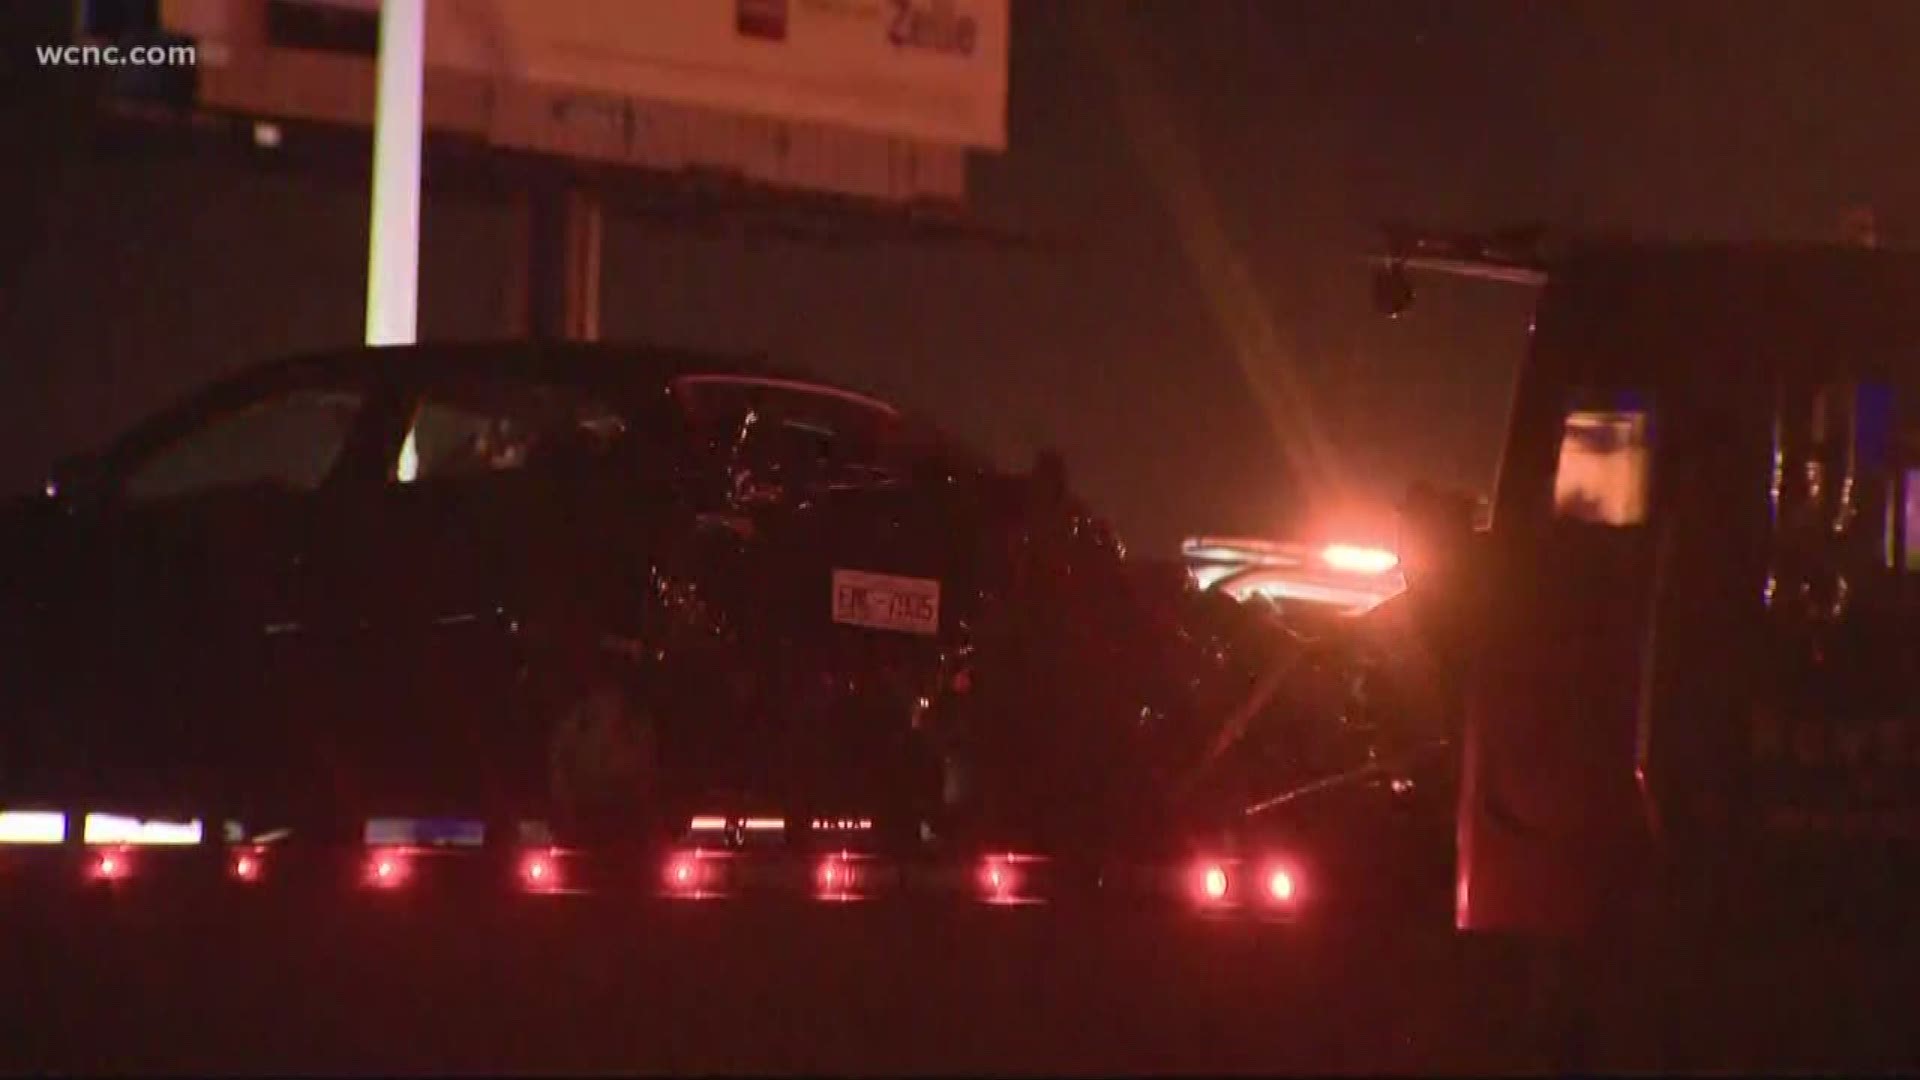 The southbound lanes of I-85 are back open after a deadly crash early Monday morning.